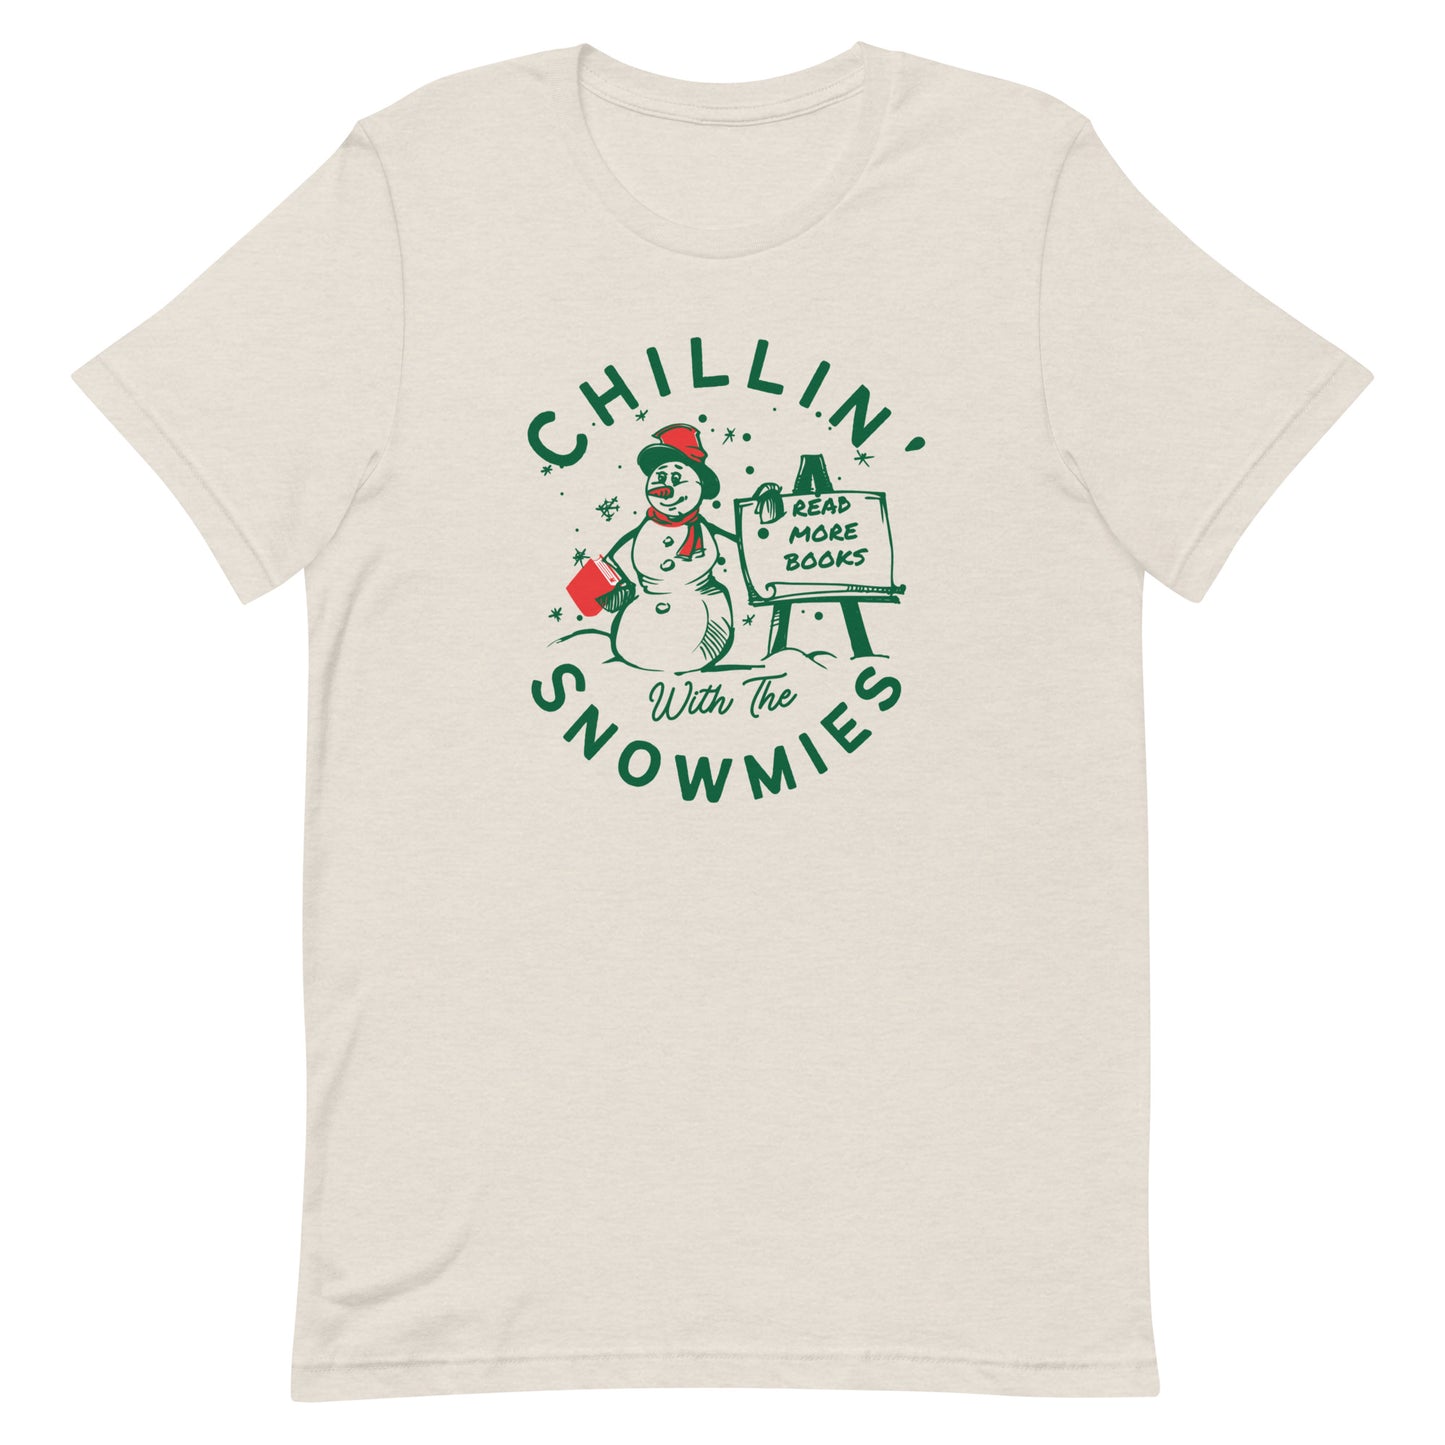 chillin with the snowmies t-shirt